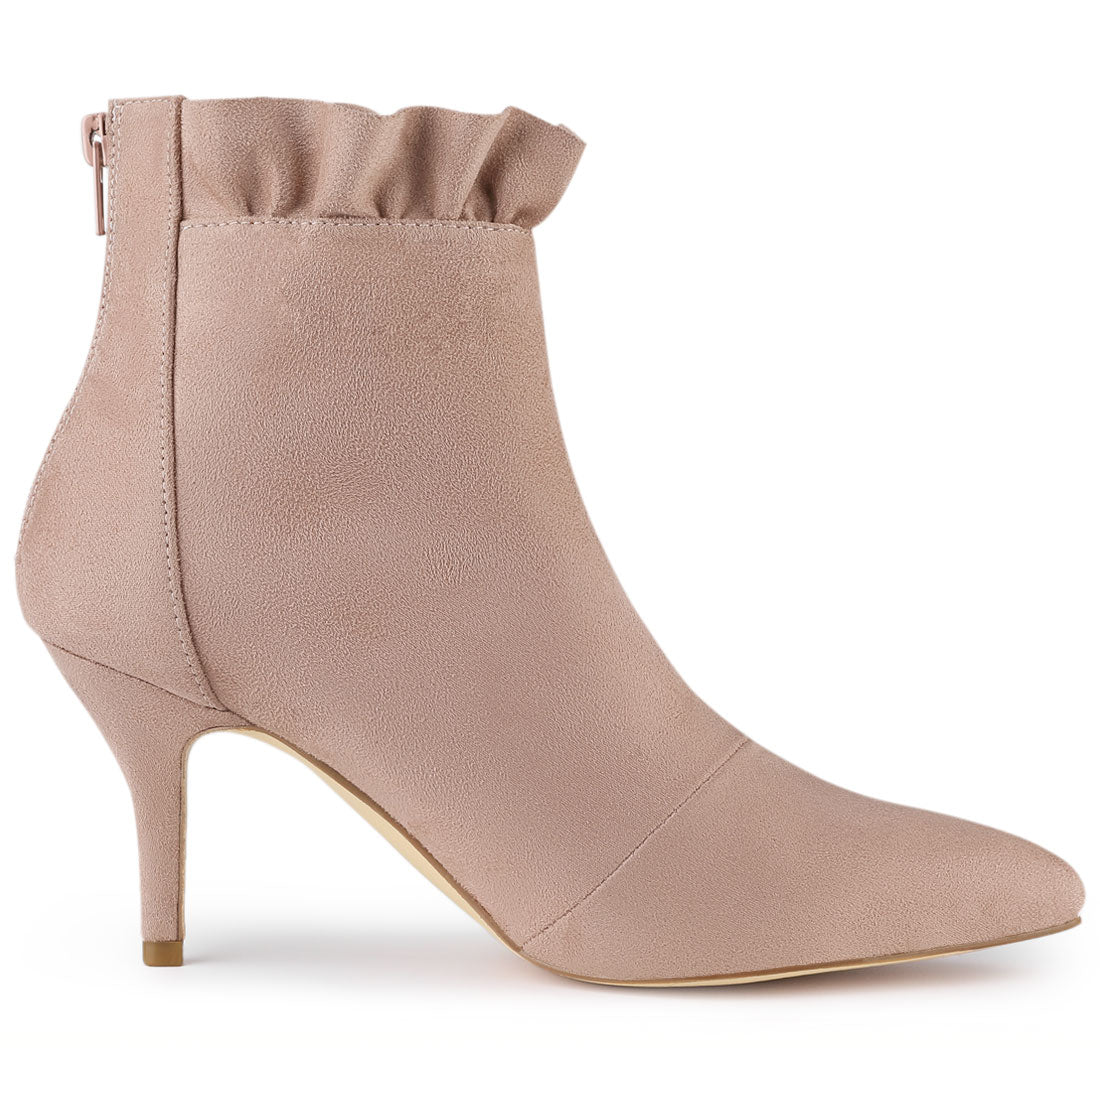 Pointed Toe Stiletto Heel Ruffle Ankle Boots